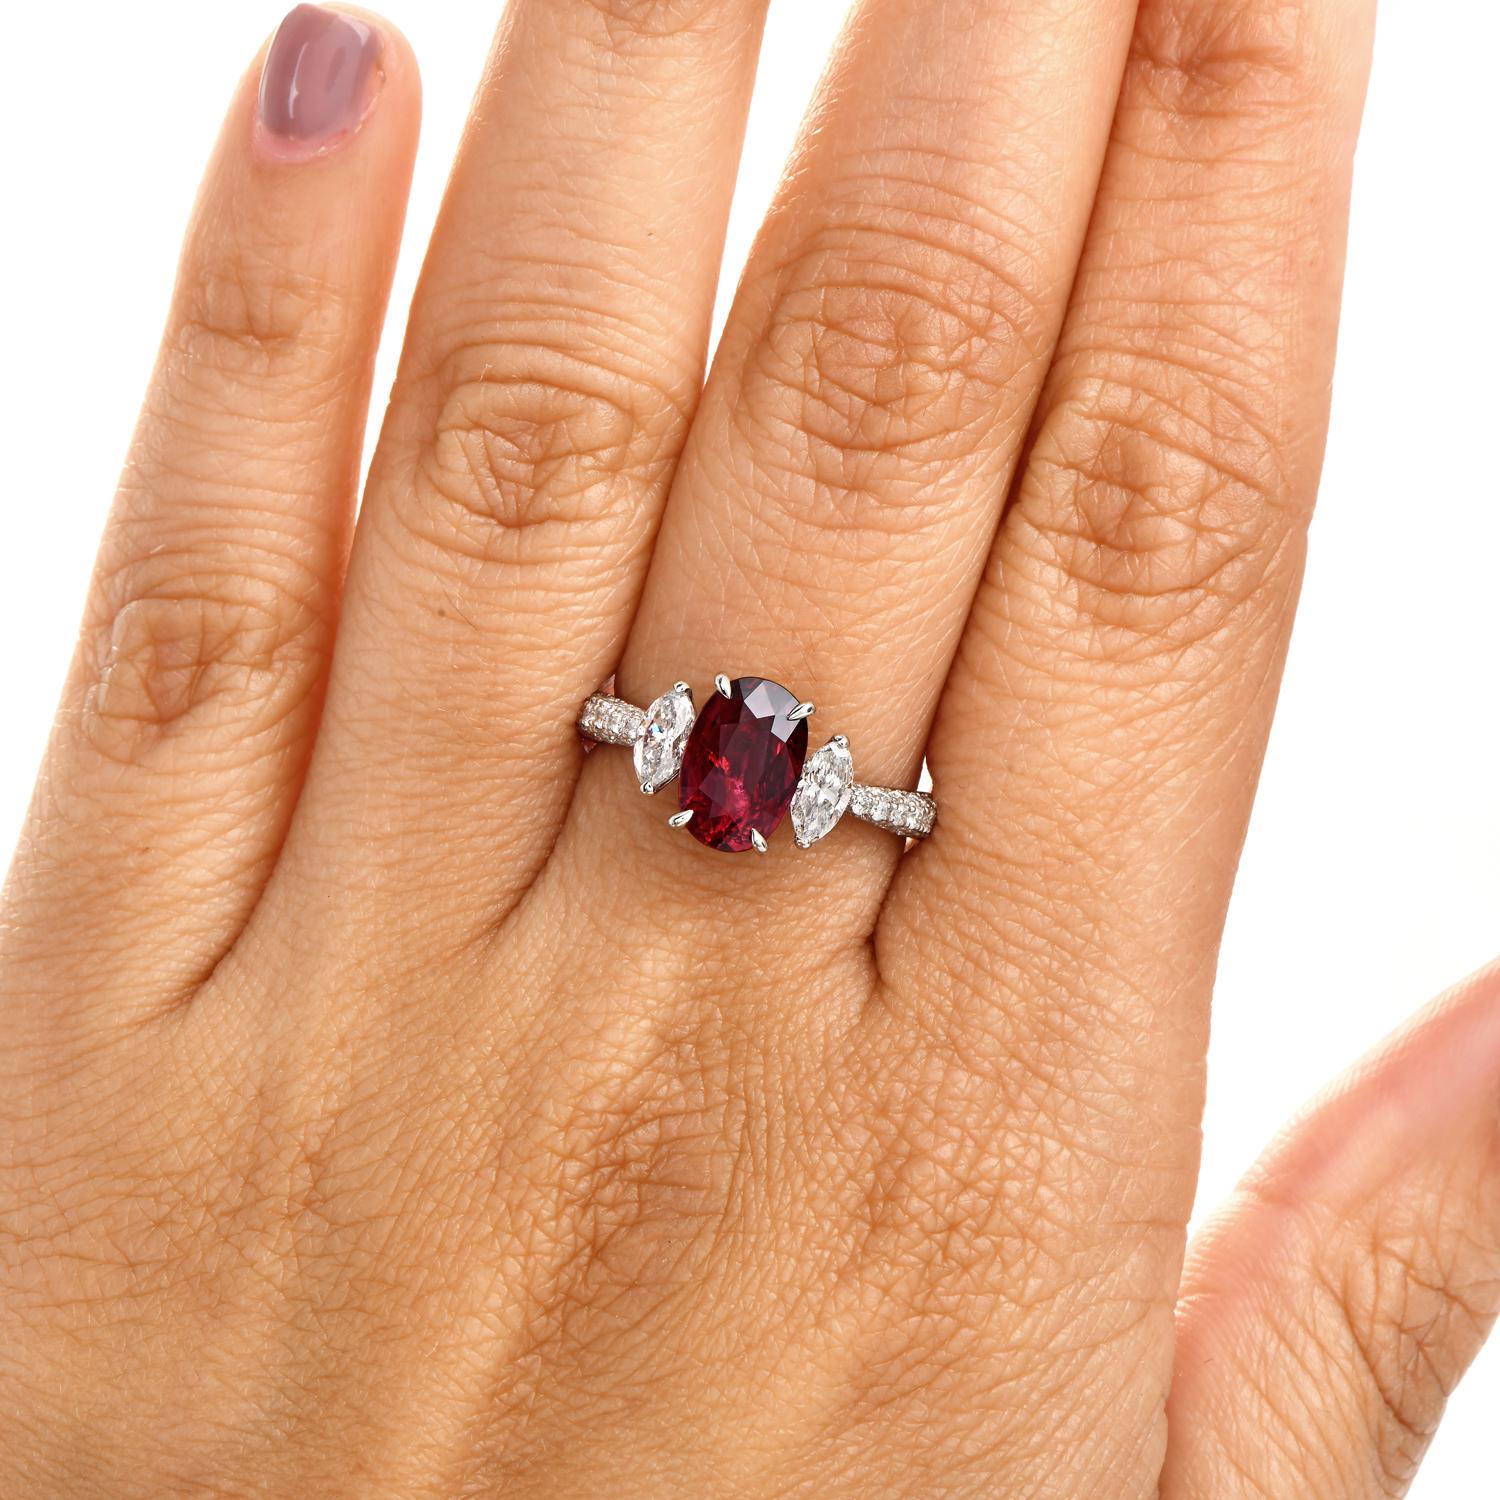 A classic three-stone ring centered with a vivid 